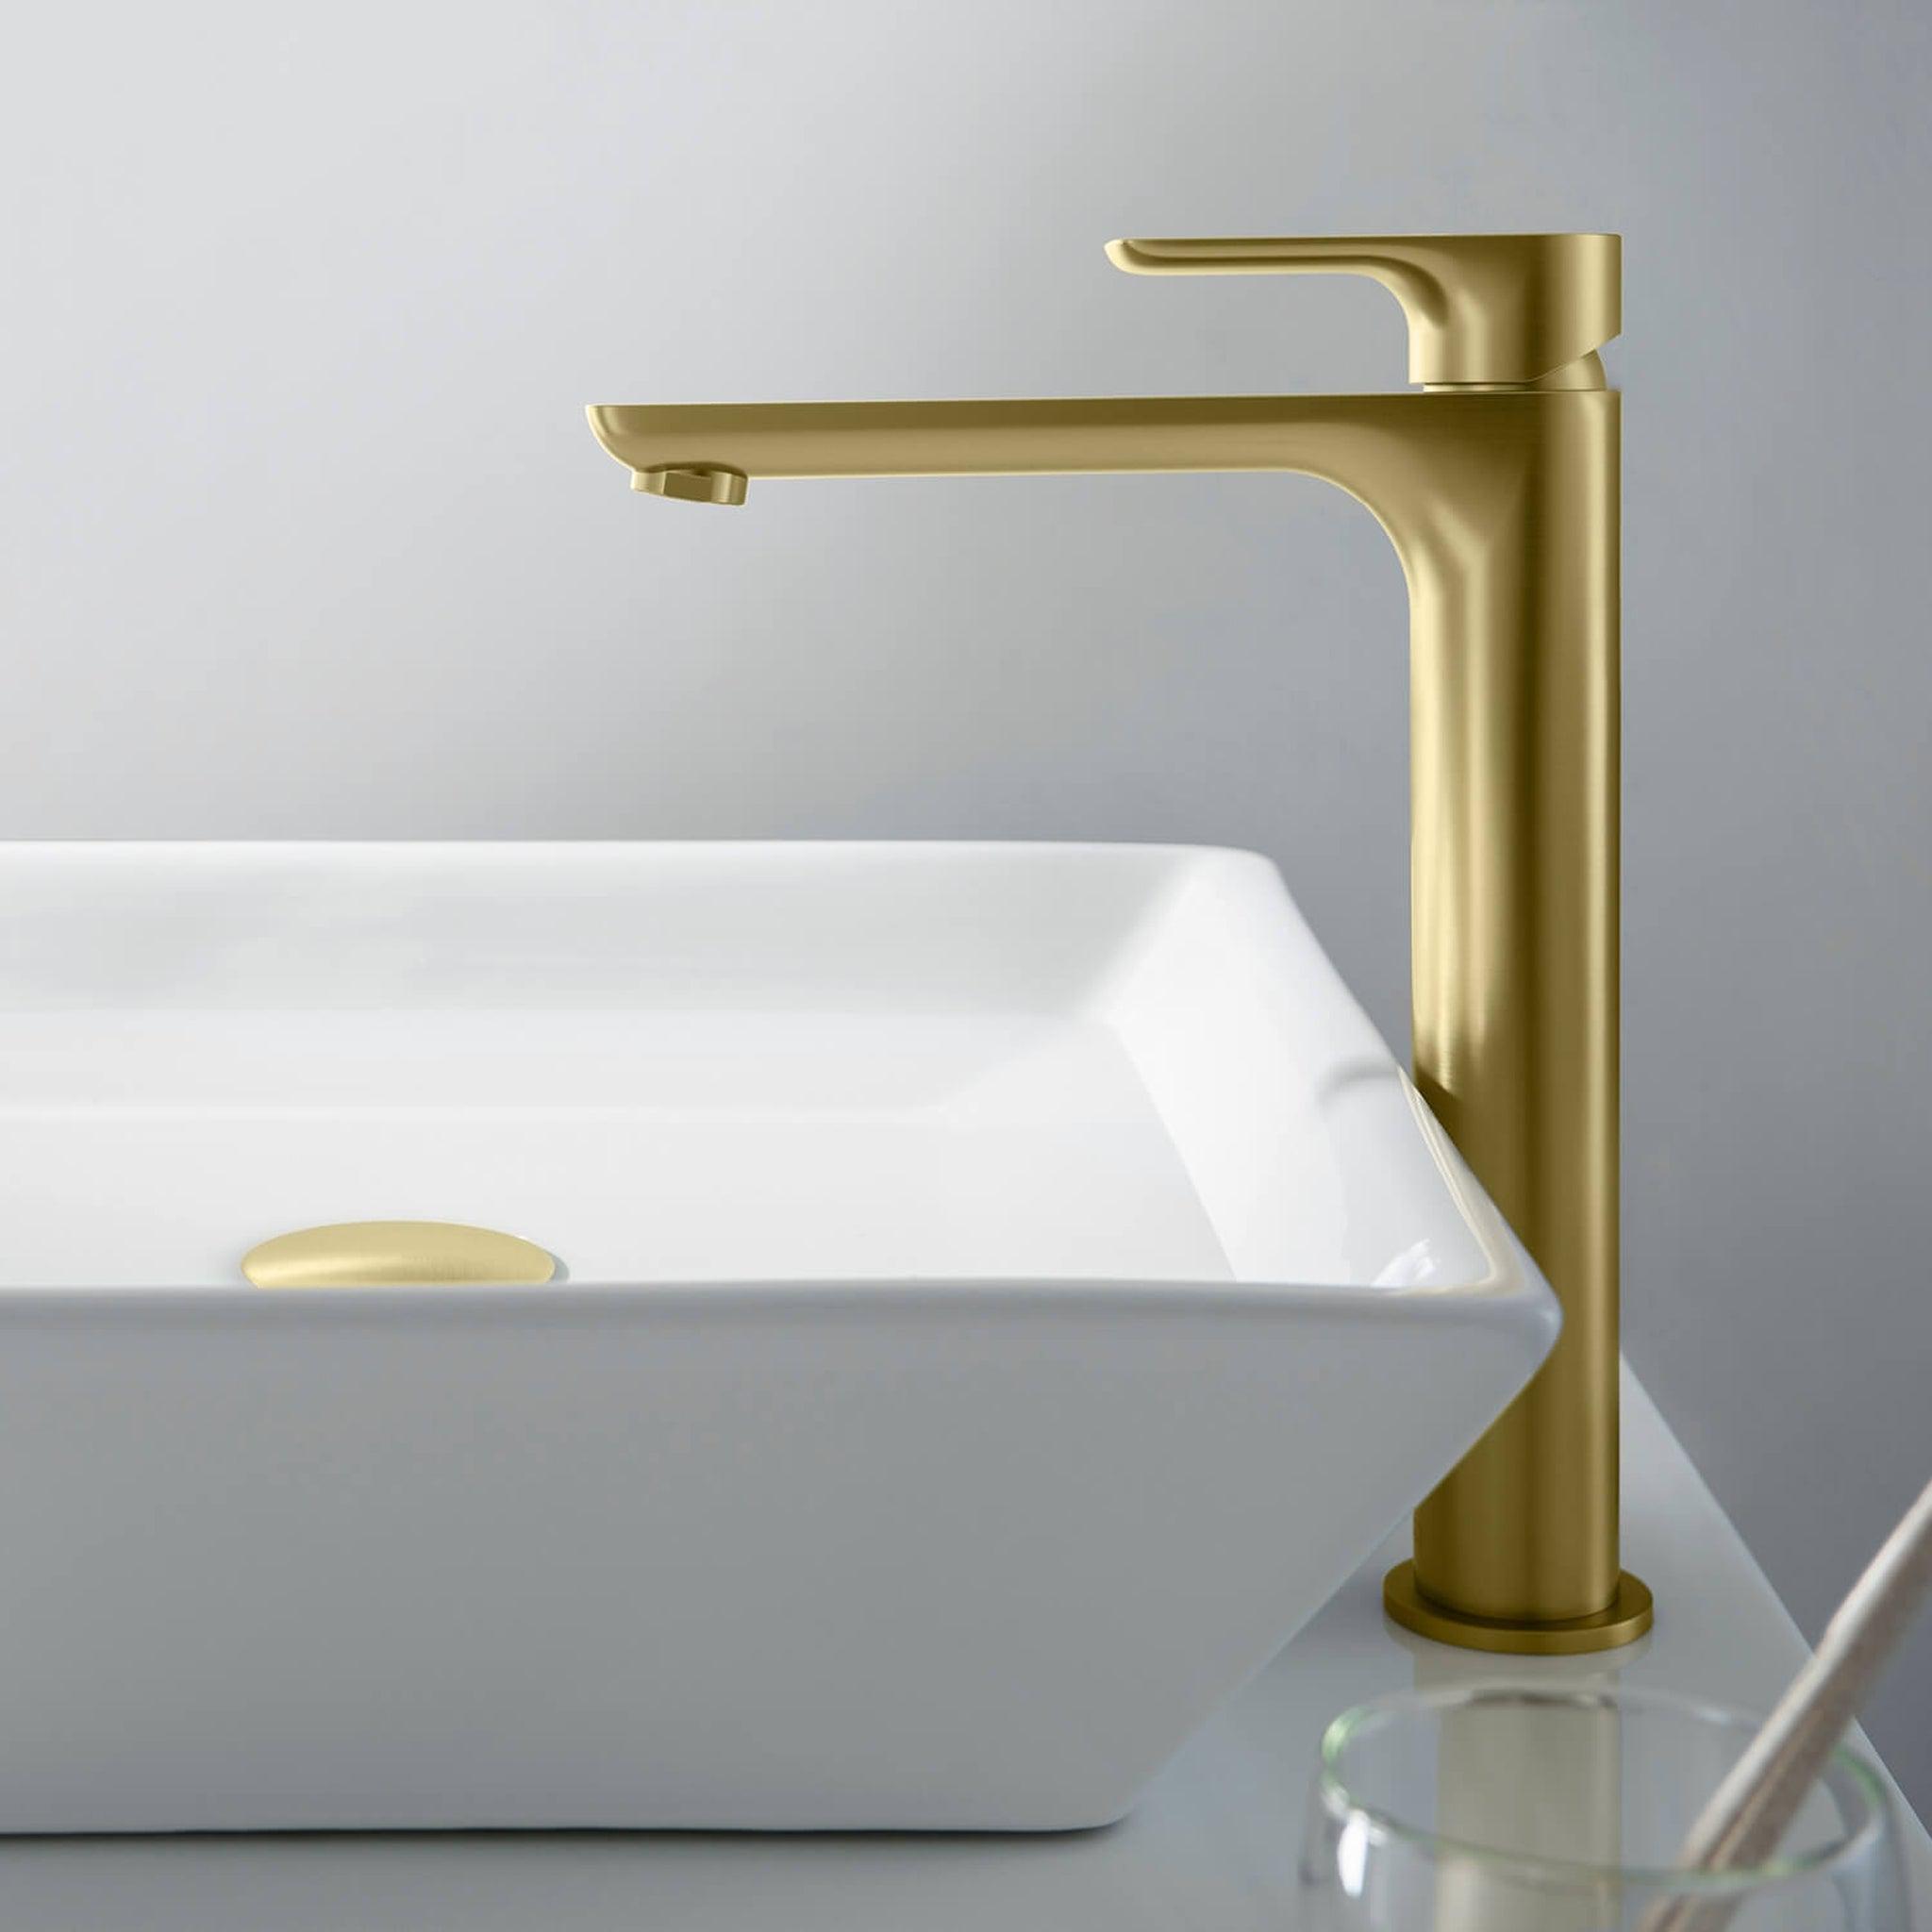 KIBI, KIBI Tender-T Single Handle Brushed Gold Solid Brass Bathroom Vessel Sink Faucet With Pop-Up Drain Stopper Small Cover Without Overflow